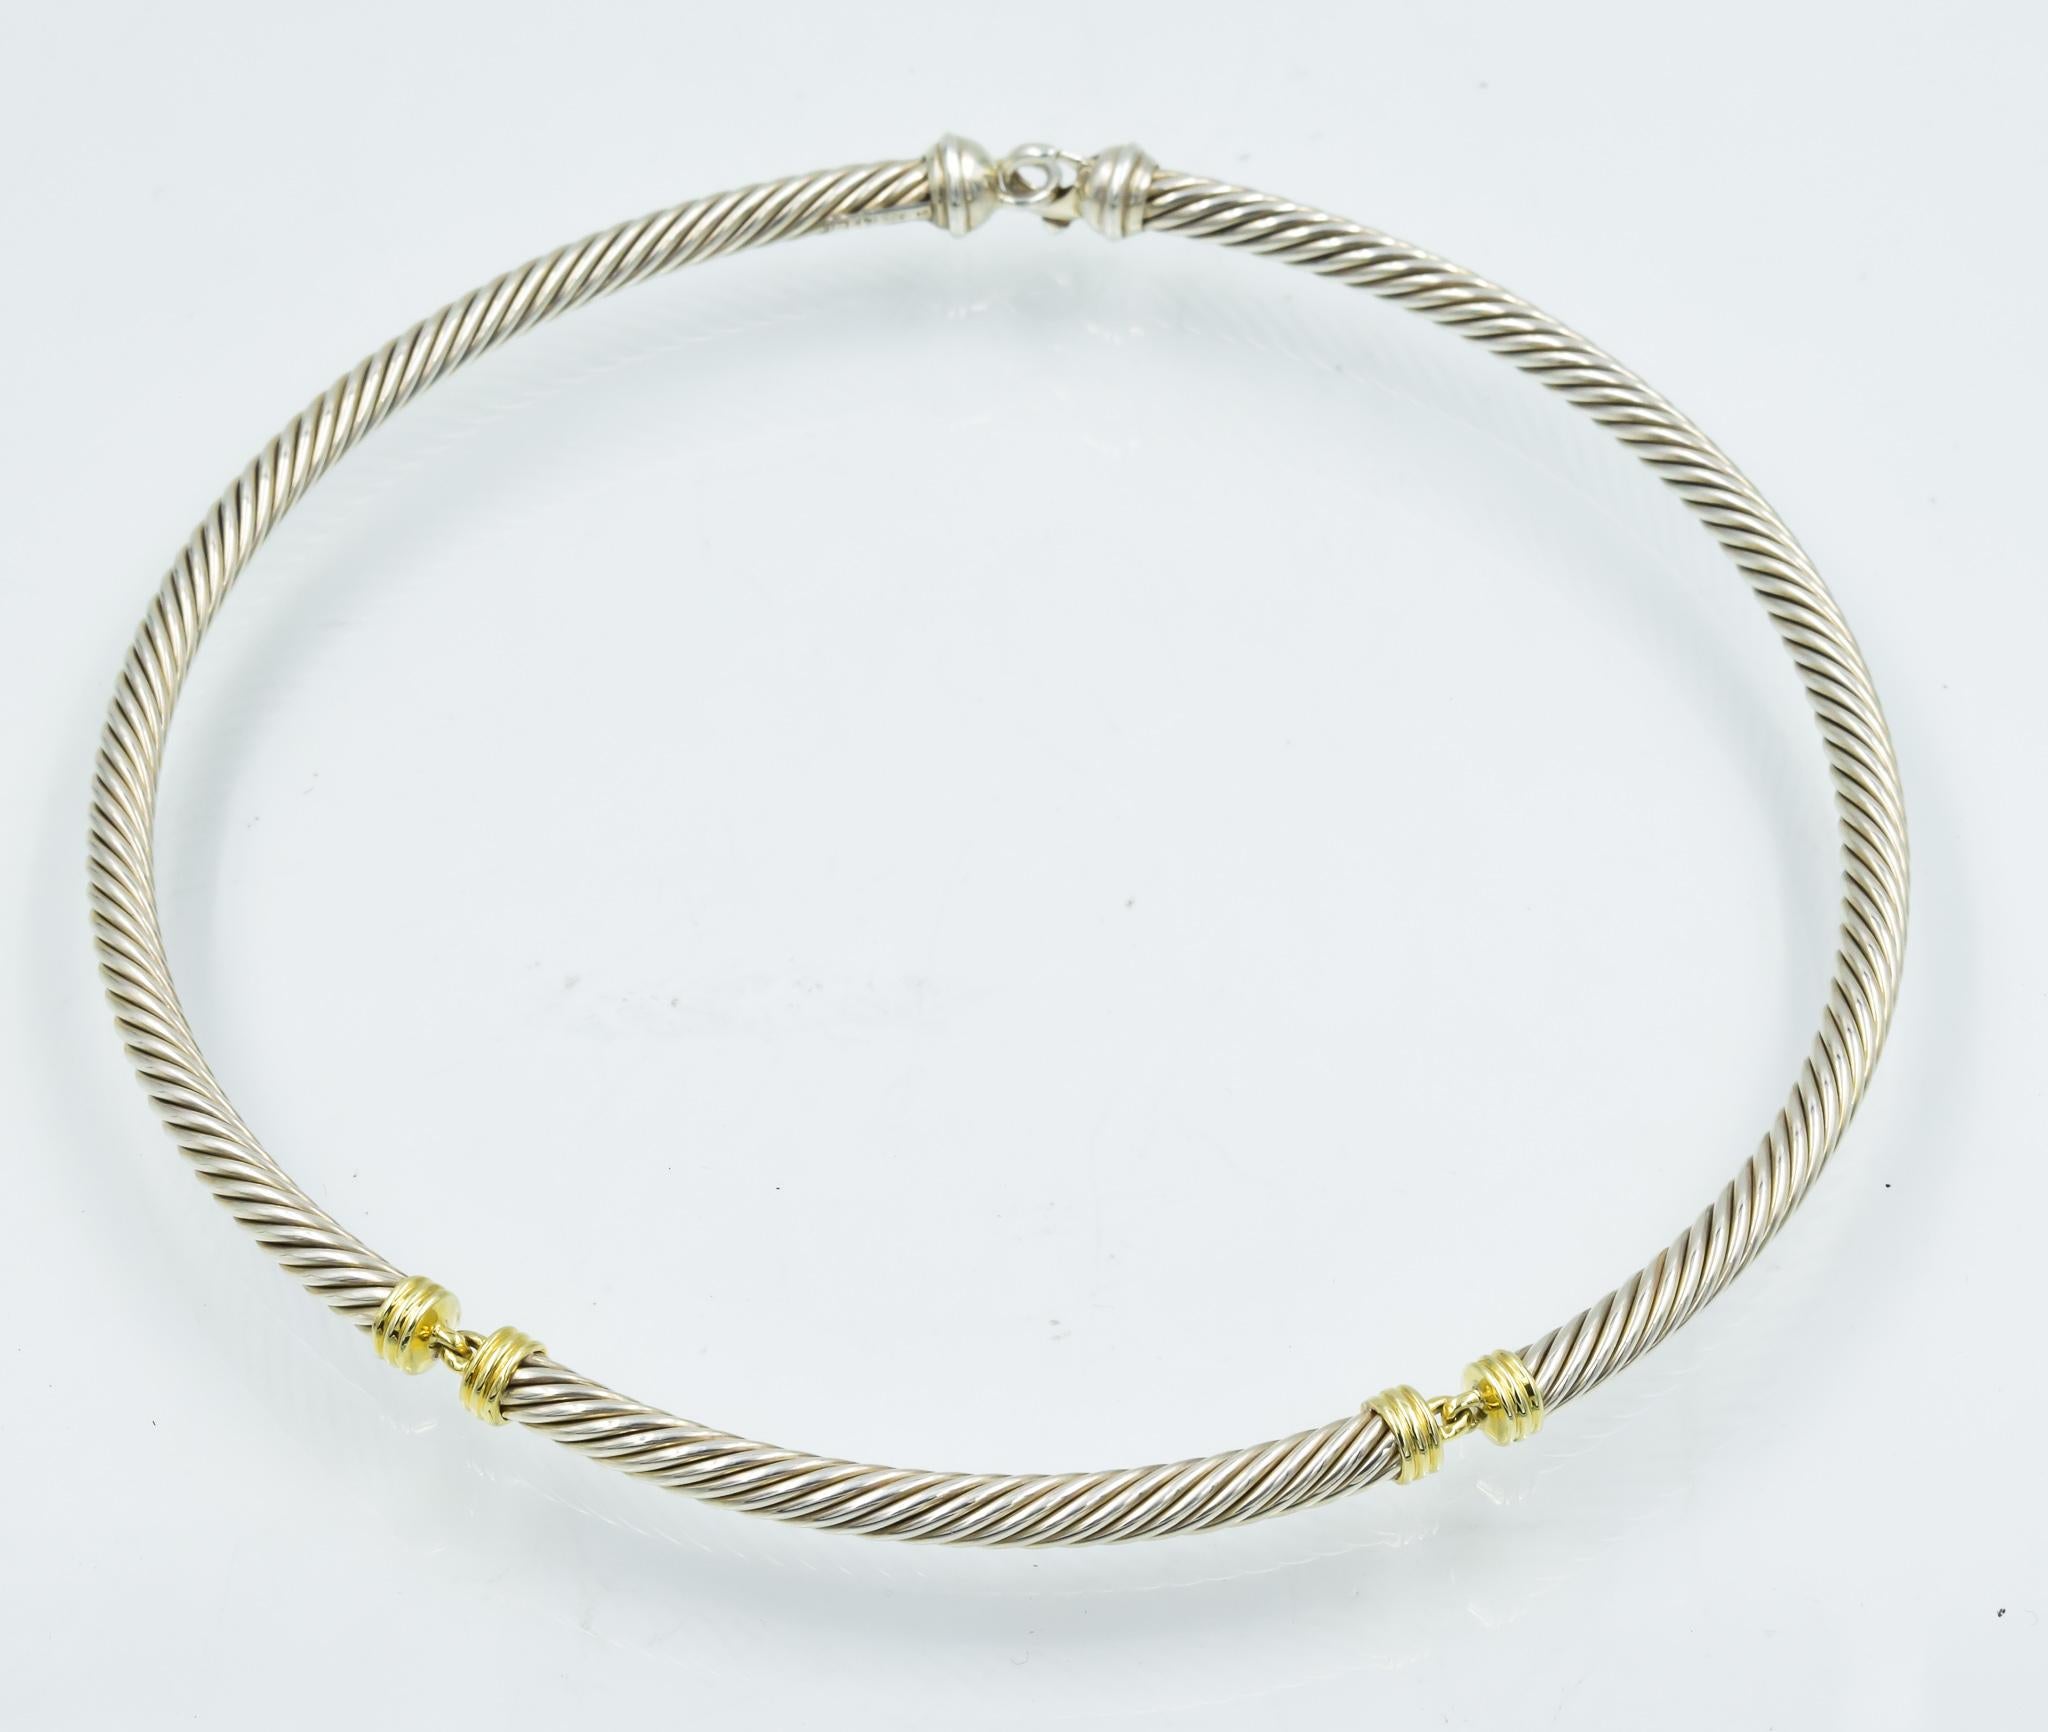 This David Yurman choker necklace is a simple yet elegant silver and 14k gold piece.  